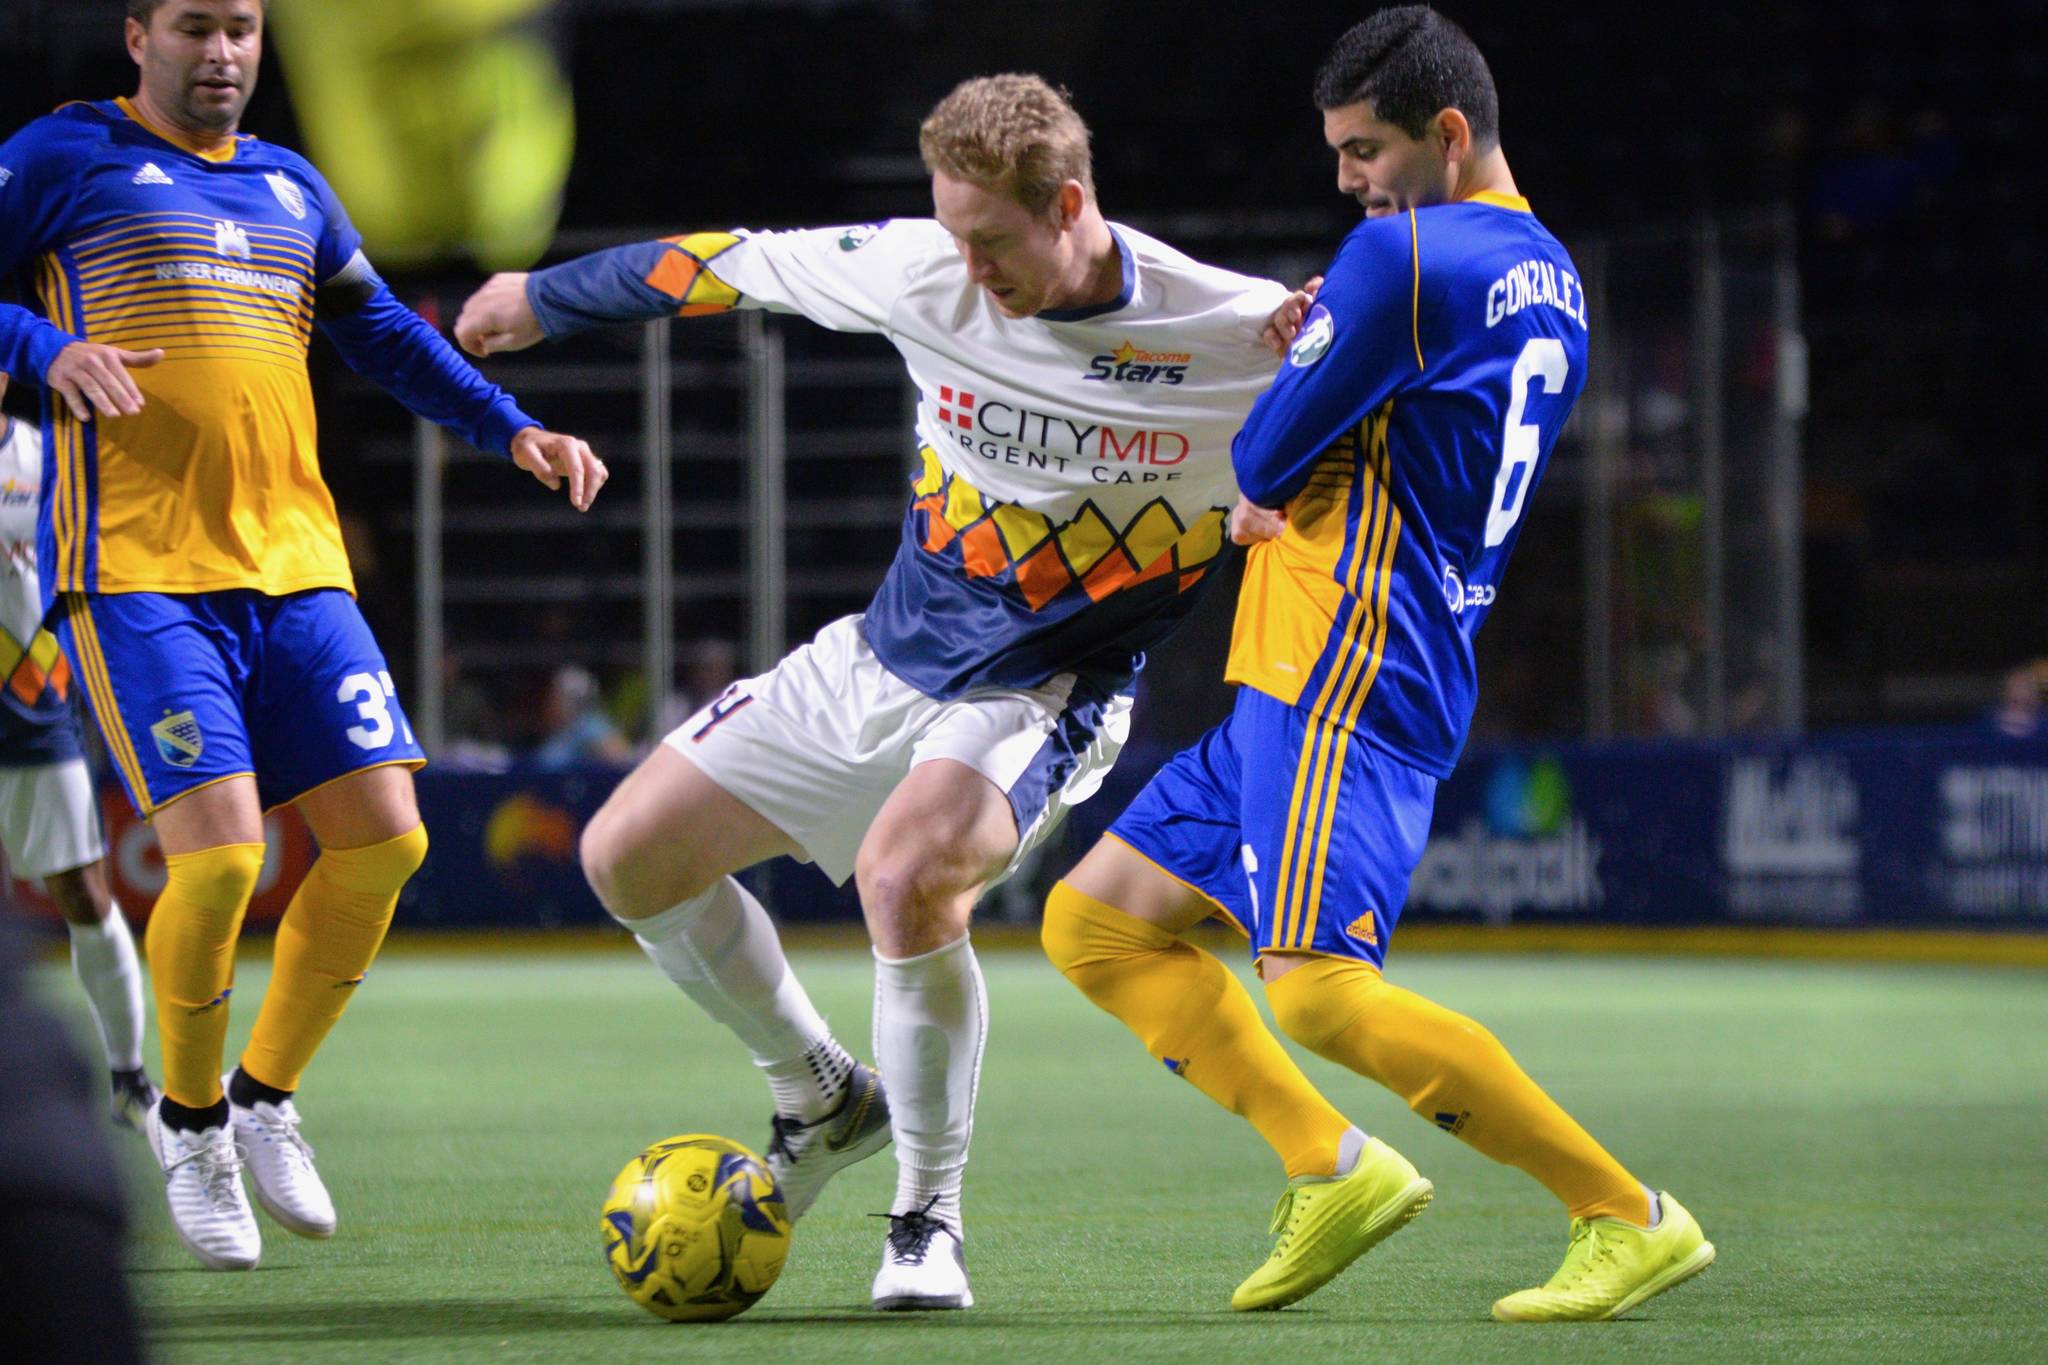 The Stars’ Vince McCluskey battles the Sockers’ Felipe Gonzalez as he pushes the ball up the pitch during MASL play Friday night at the accesso ShoWare Center. COURTESY PHOTO, Stars